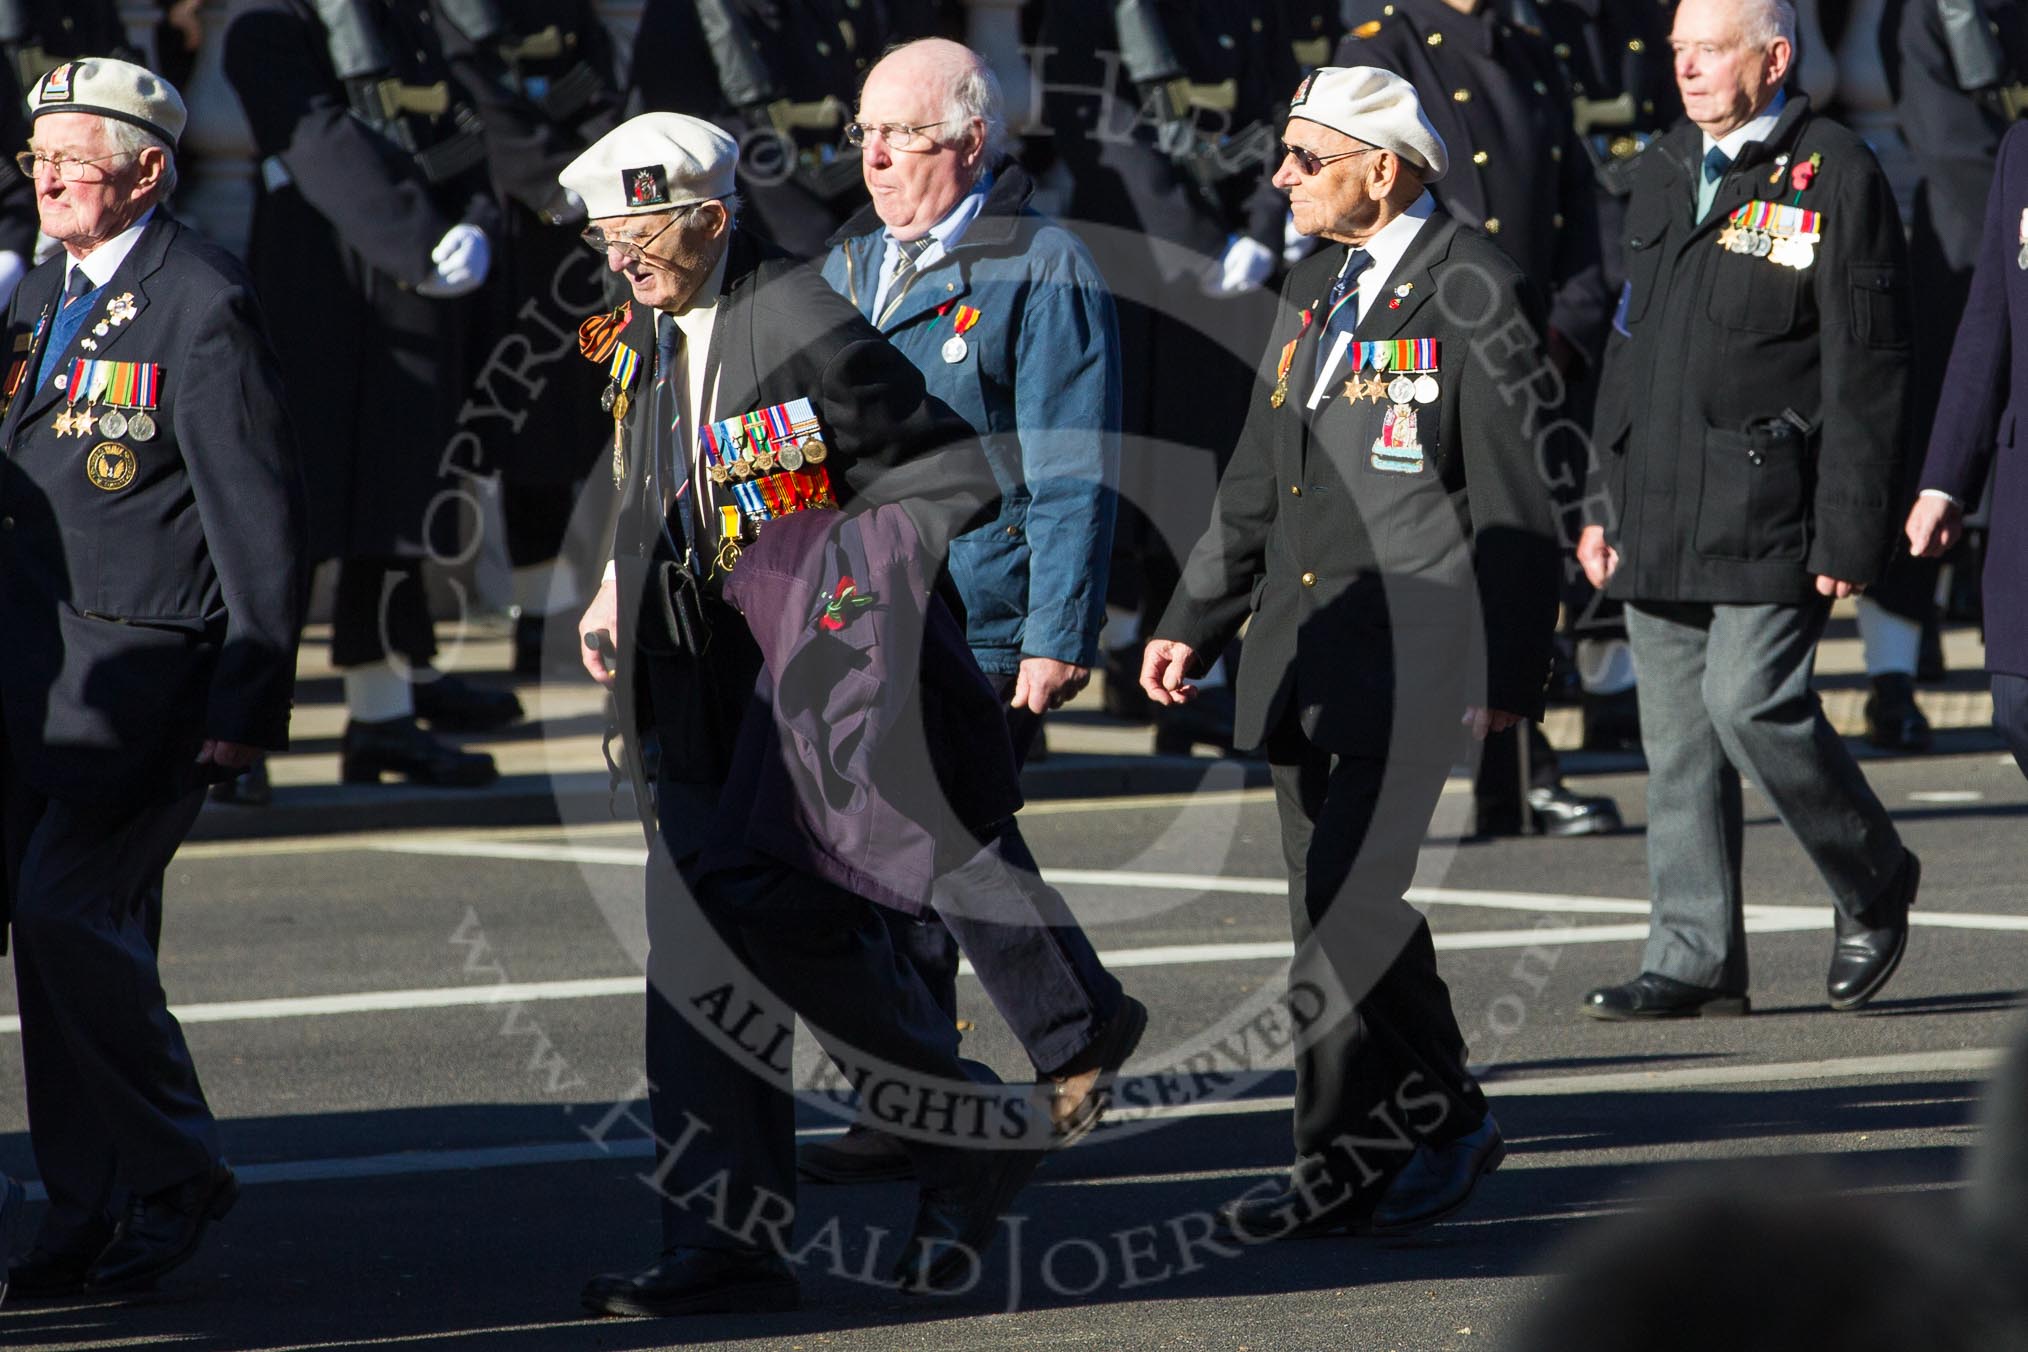 Remembrance Sunday 2012 Cenotaph March Past: Group E35 - Russian Convoy Club..
Whitehall, Cenotaph,
London SW1,

United Kingdom,
on 11 November 2012 at 11:42, image #262